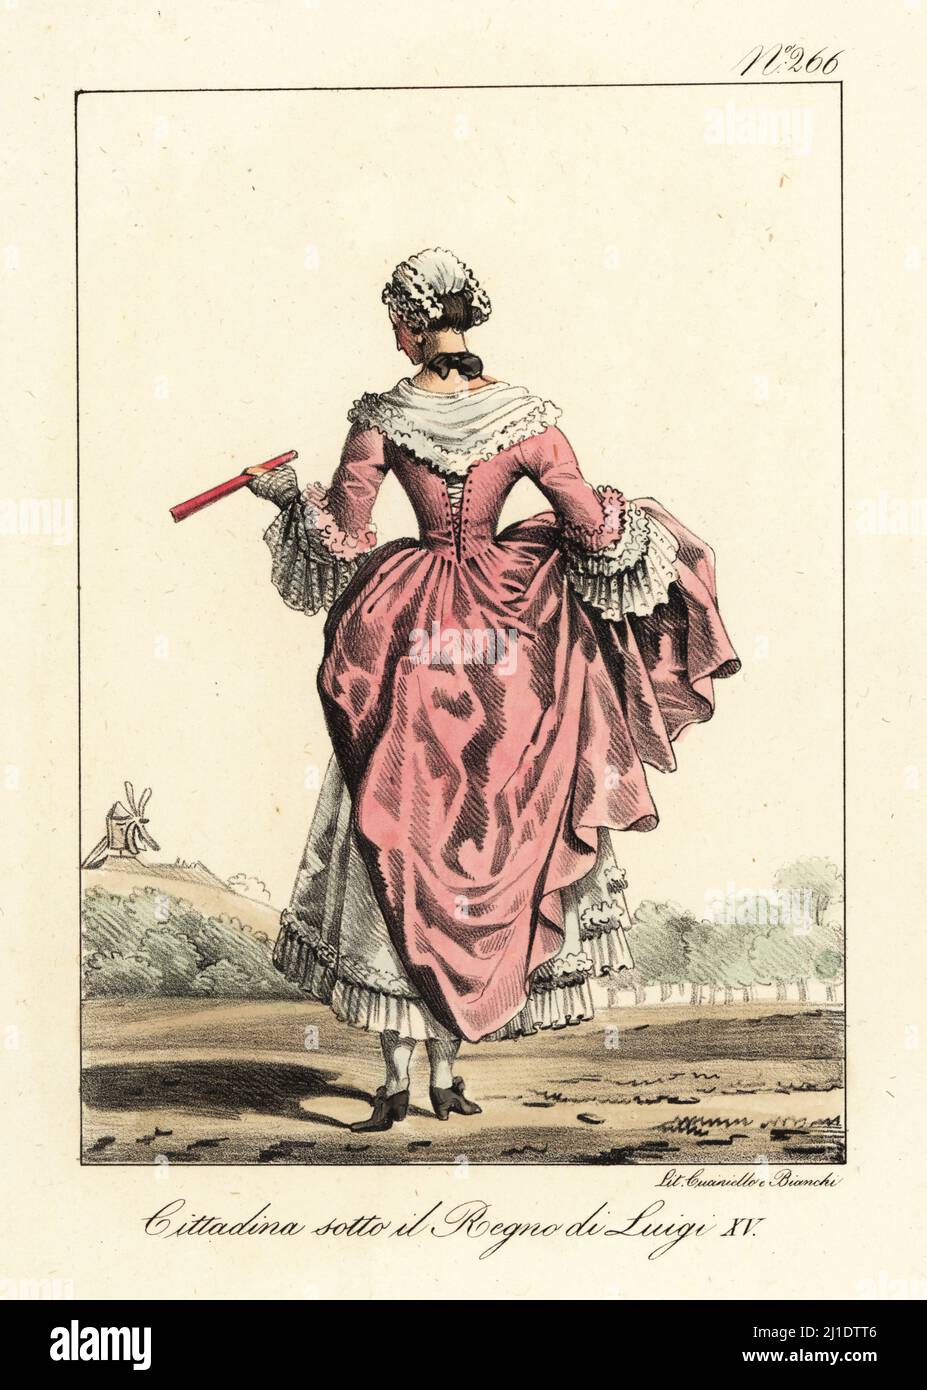 Rear view of the costume of a French bourgeois woman, mid-18th century. In dress with lace collar, cuffs and petticoats, bonnet and fan. Bourgeoise sous le Regne de Louis XV. Handcoloured lithograph by Lorenzo Bianchi and Domenico Cuciniello after Hippolyte Lecomte from Costumi civili e militari della monarchia francese dal 1200 al 1820, Naples, 1825. Italian edition of Lecomte’s Civilian and military costumes of the French monarchy from 1200 to 1820. Stock Photo